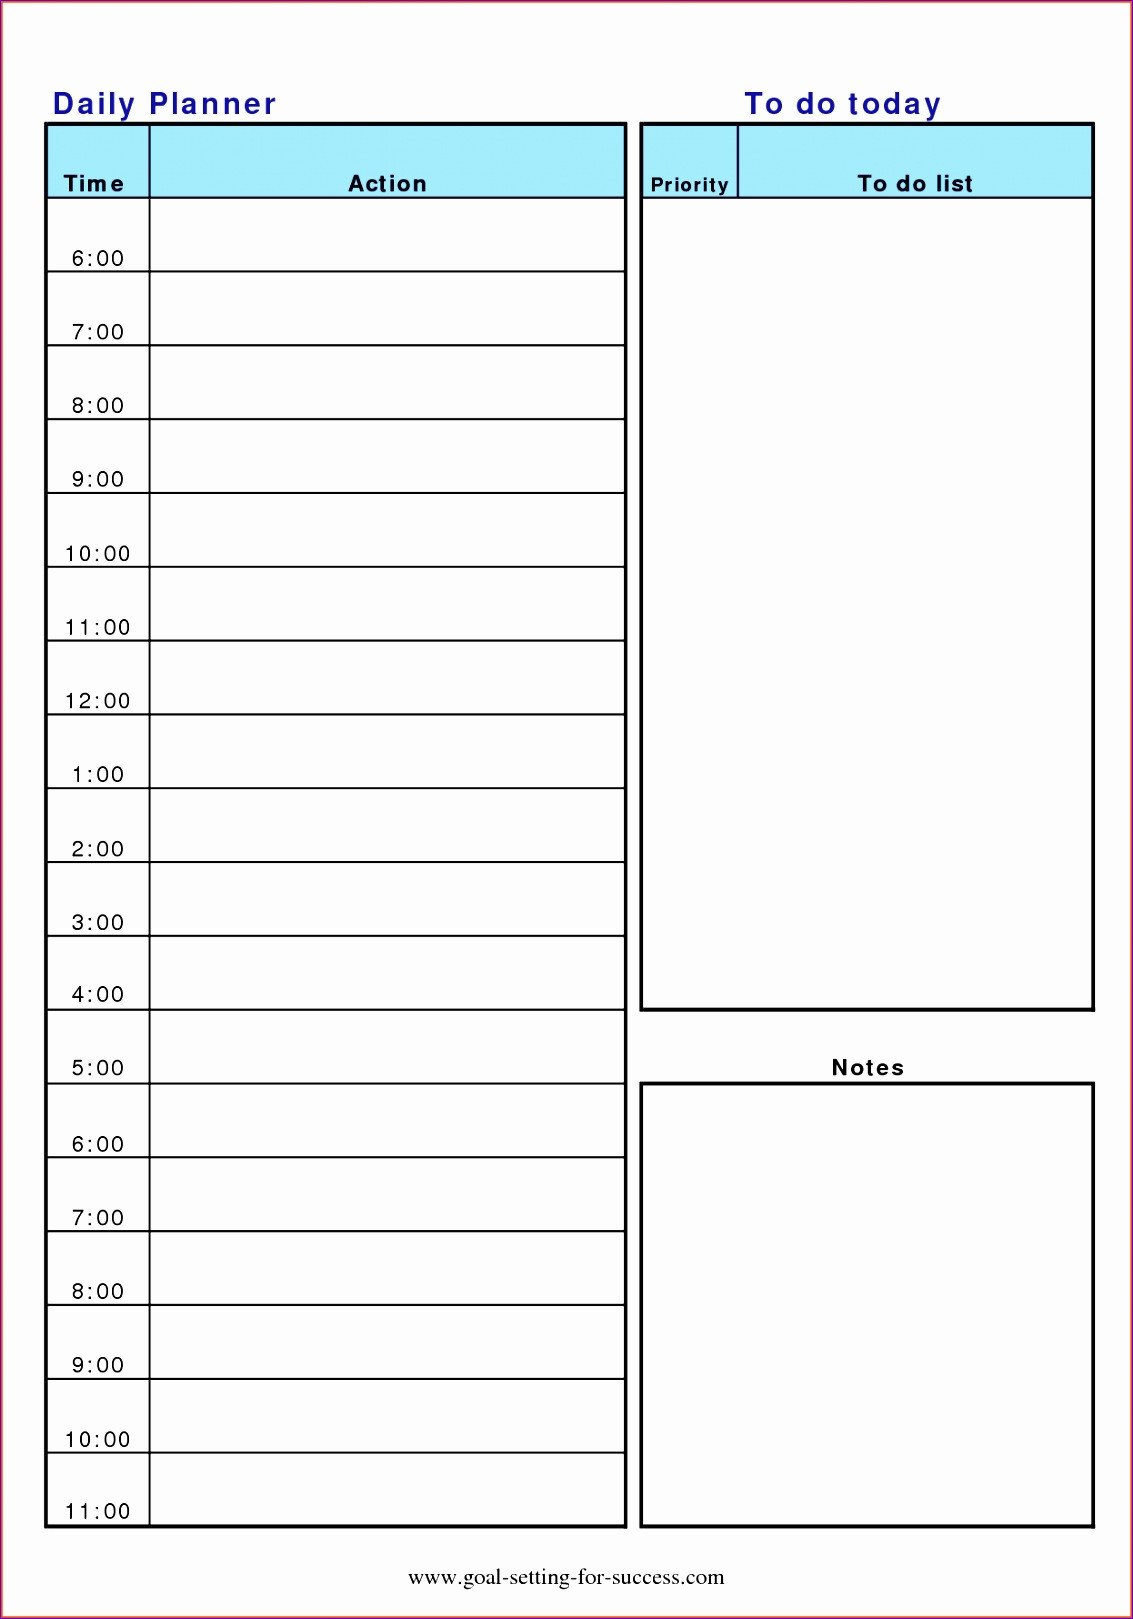 Daily Planner Template Excel 8 Daily Planner Excel Template Exceltemplates